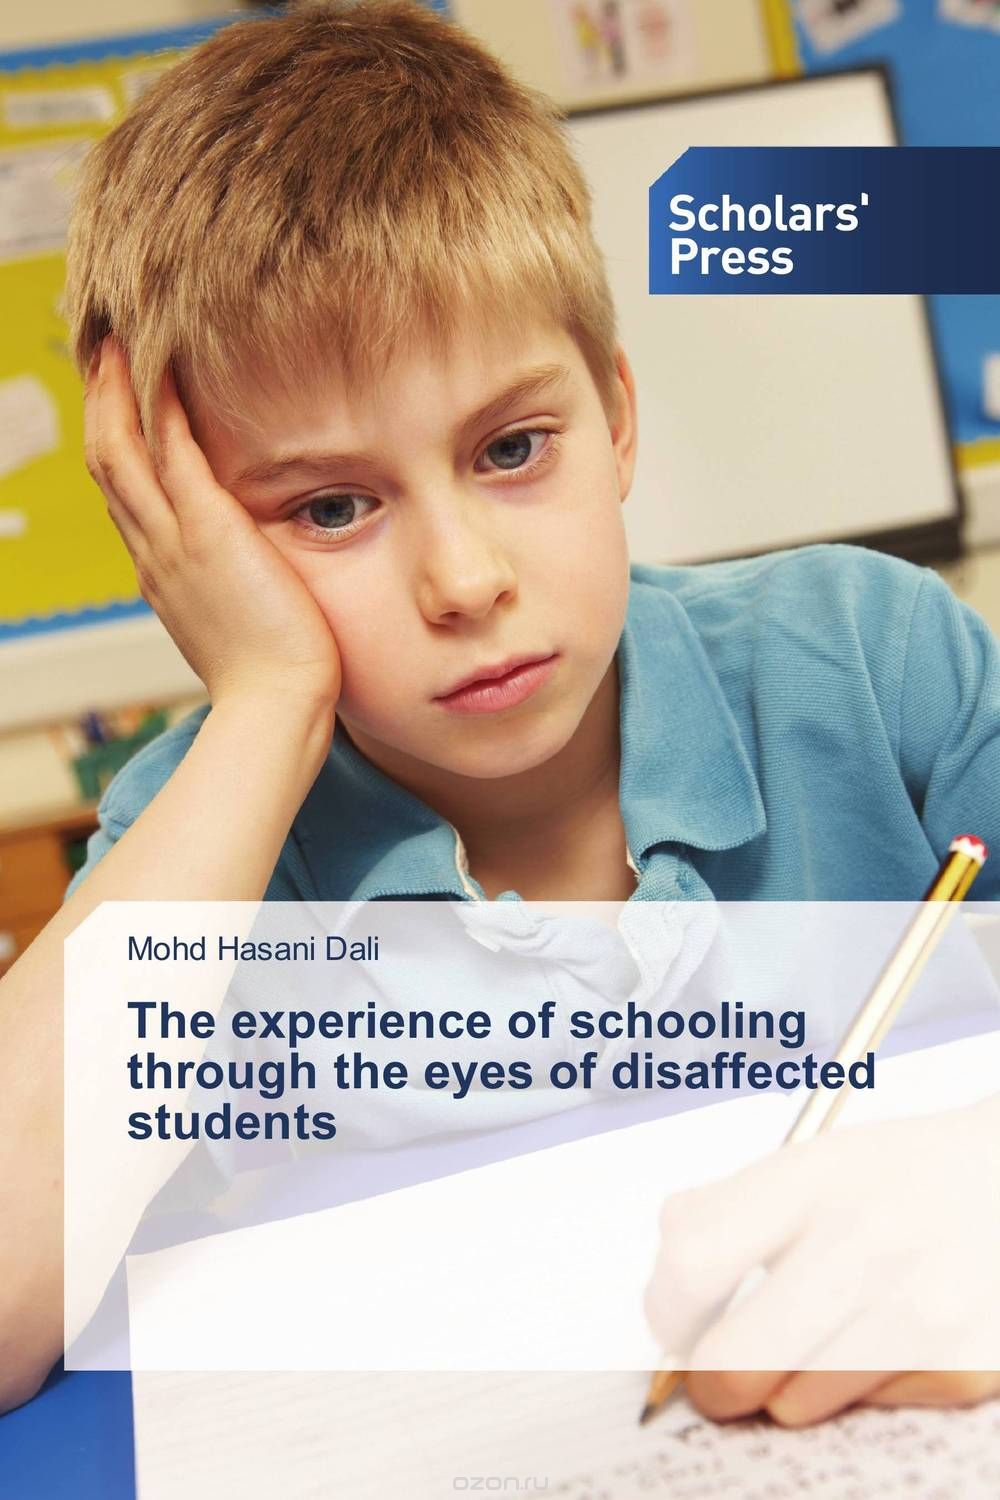 Скачать книгу "The experience of schooling through the eyes of disaffected students"